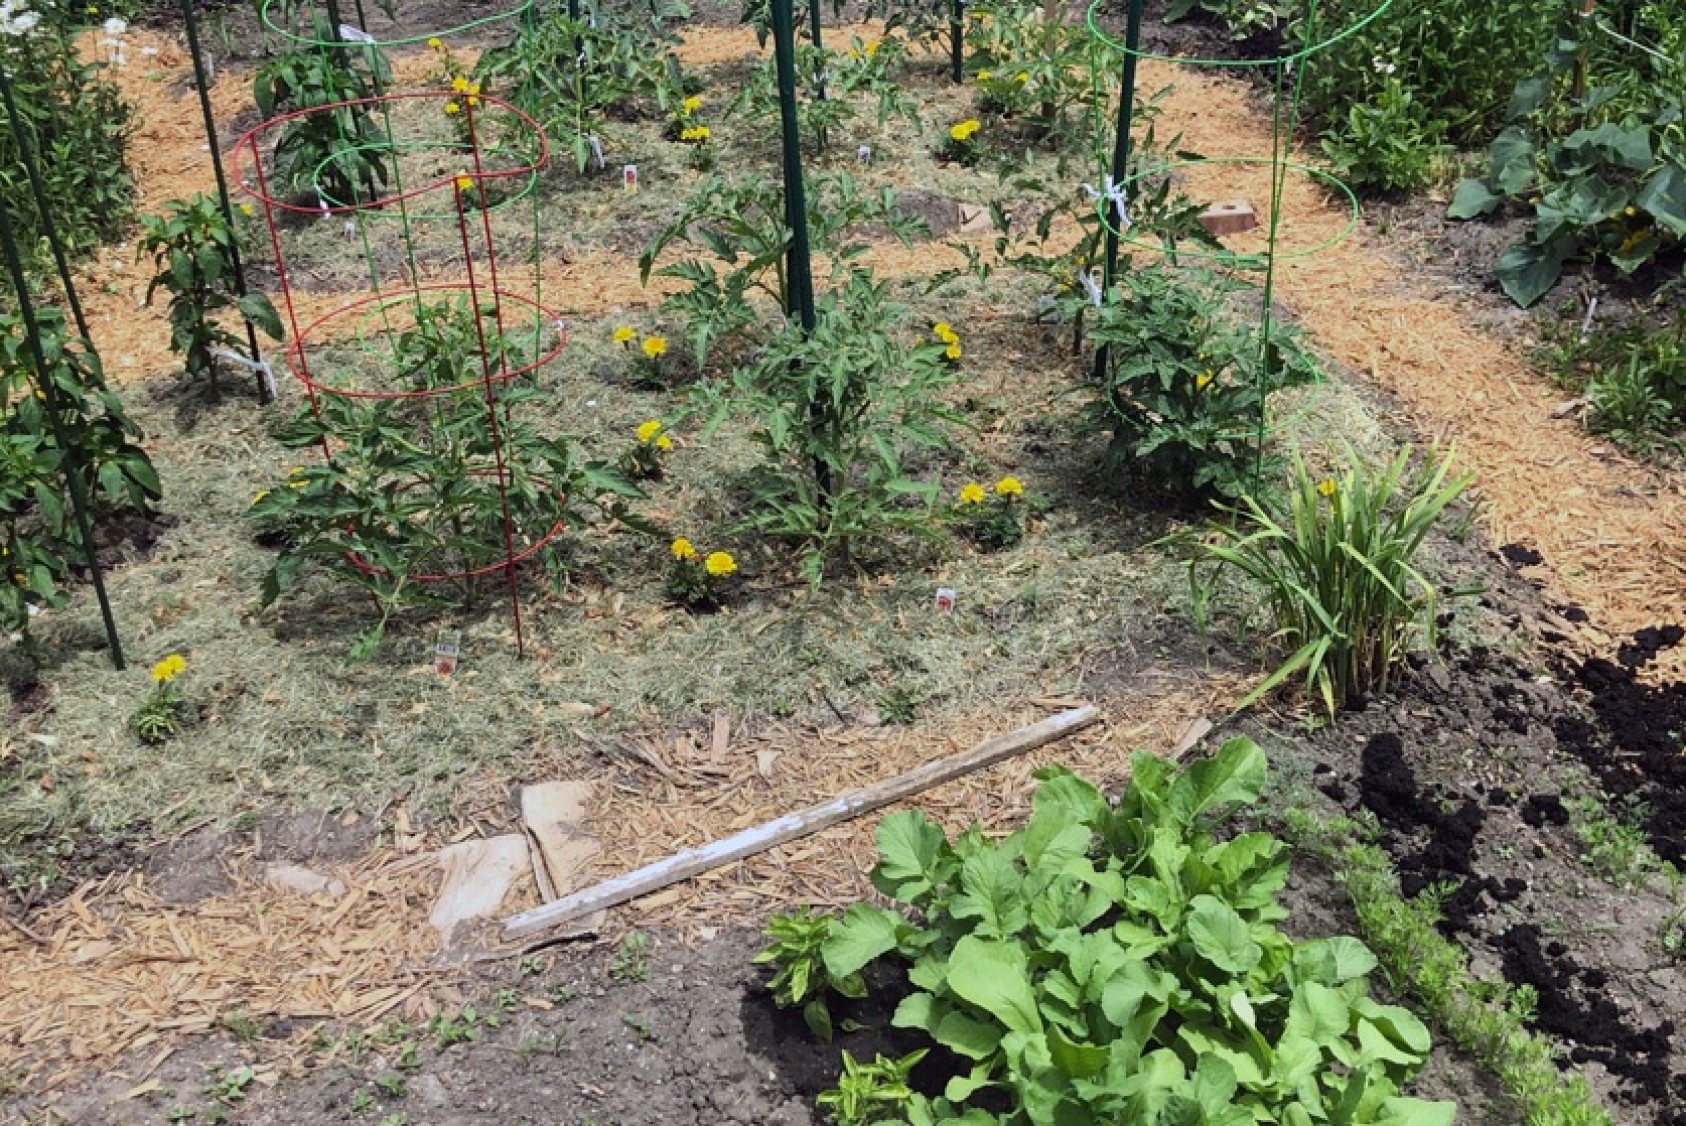 Blake’s garden in late May 2020, after transplanting